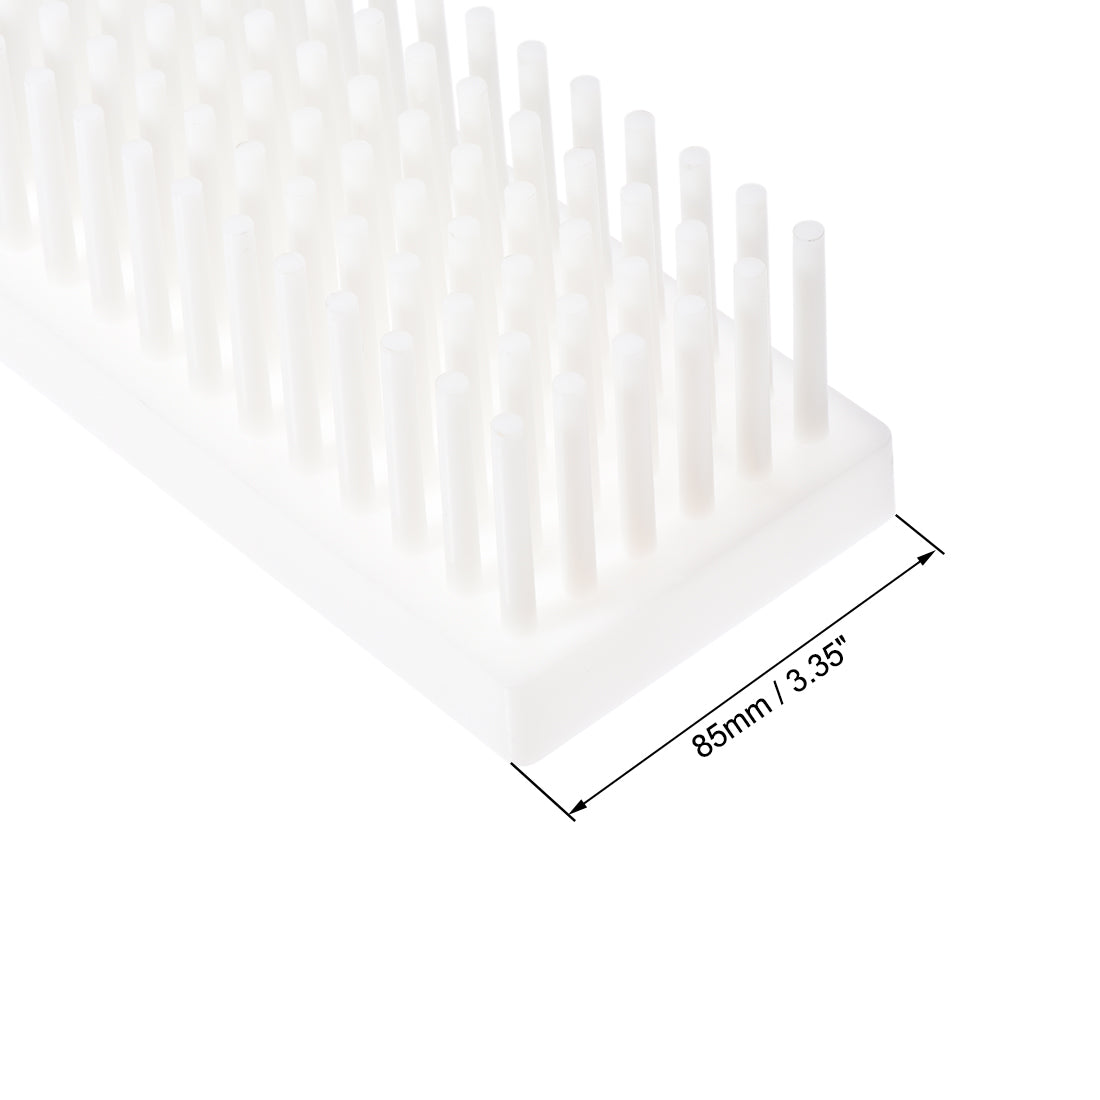 Uxcell Uxcell Polypropylene Test Tube Stand Holder Rack 102 Wells for 10-13mm Tubes White